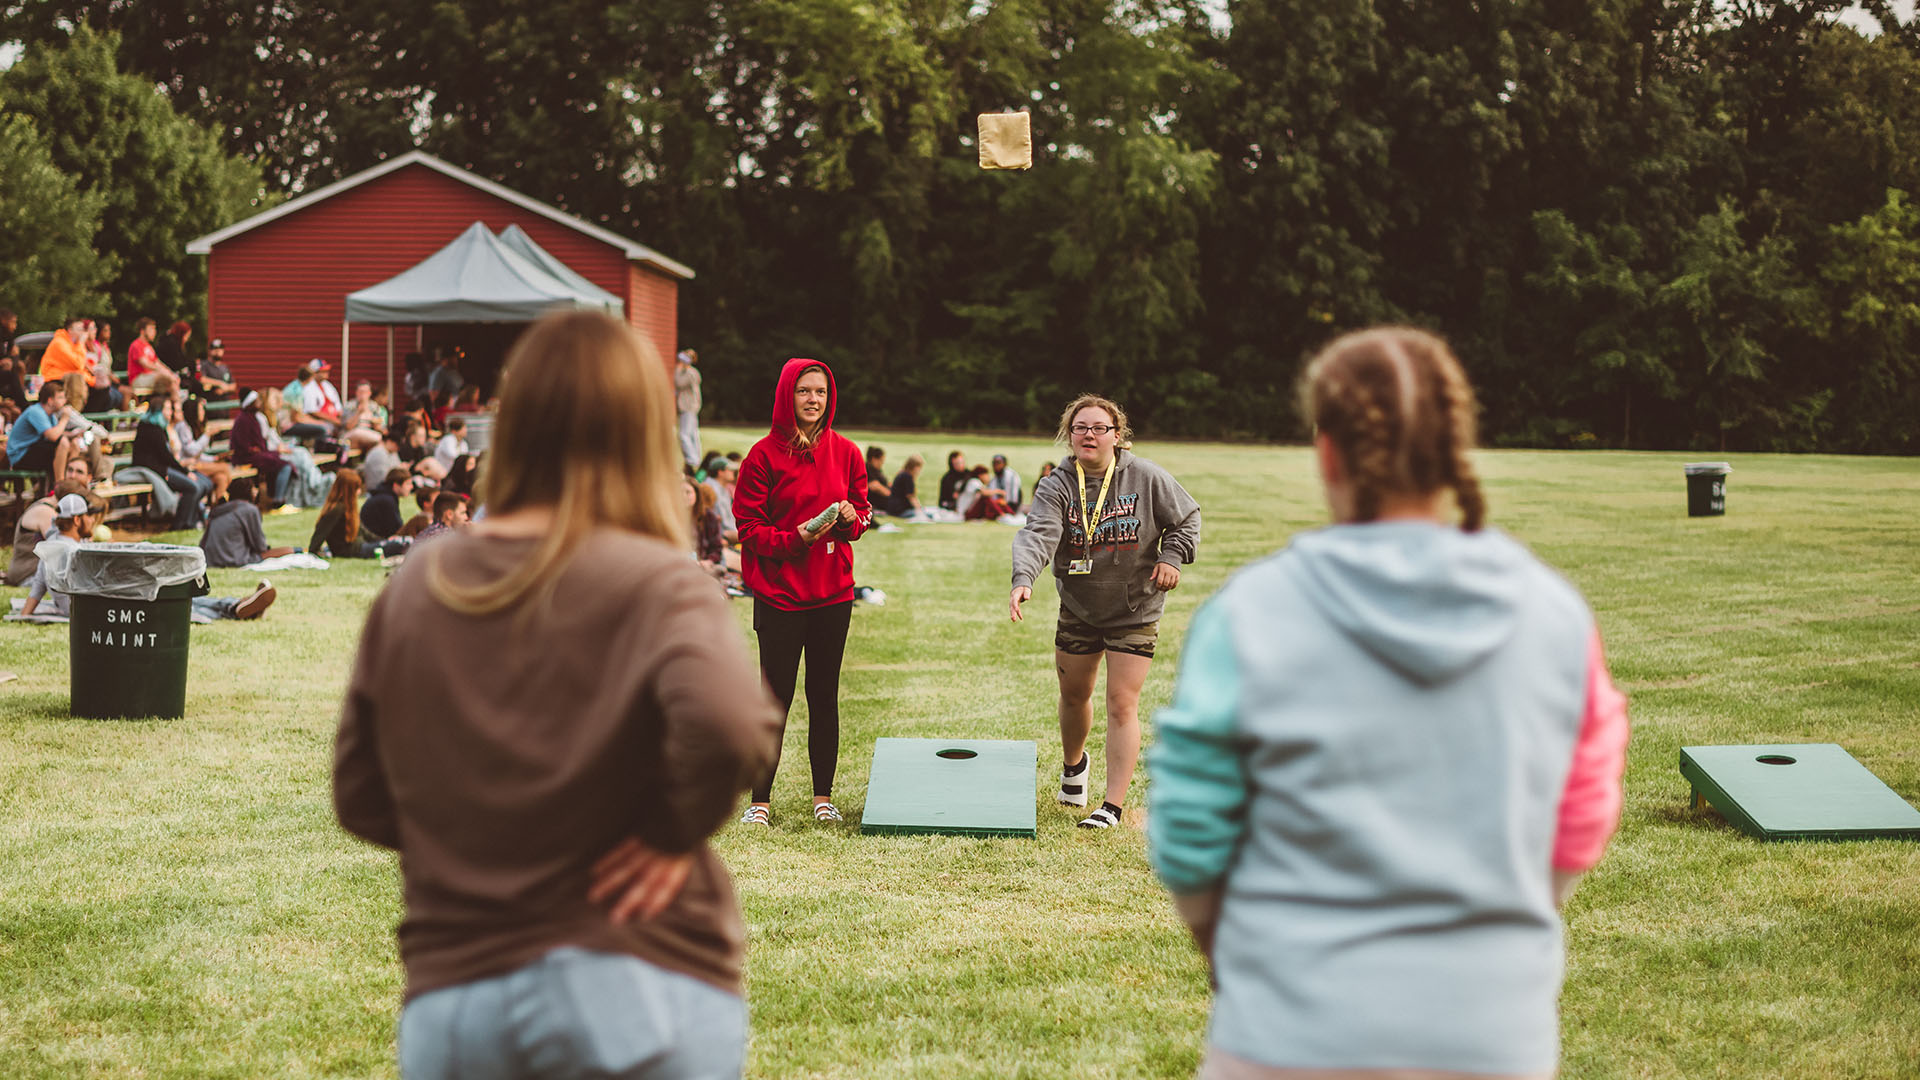 Student activities include outdoor games, like cornhole.